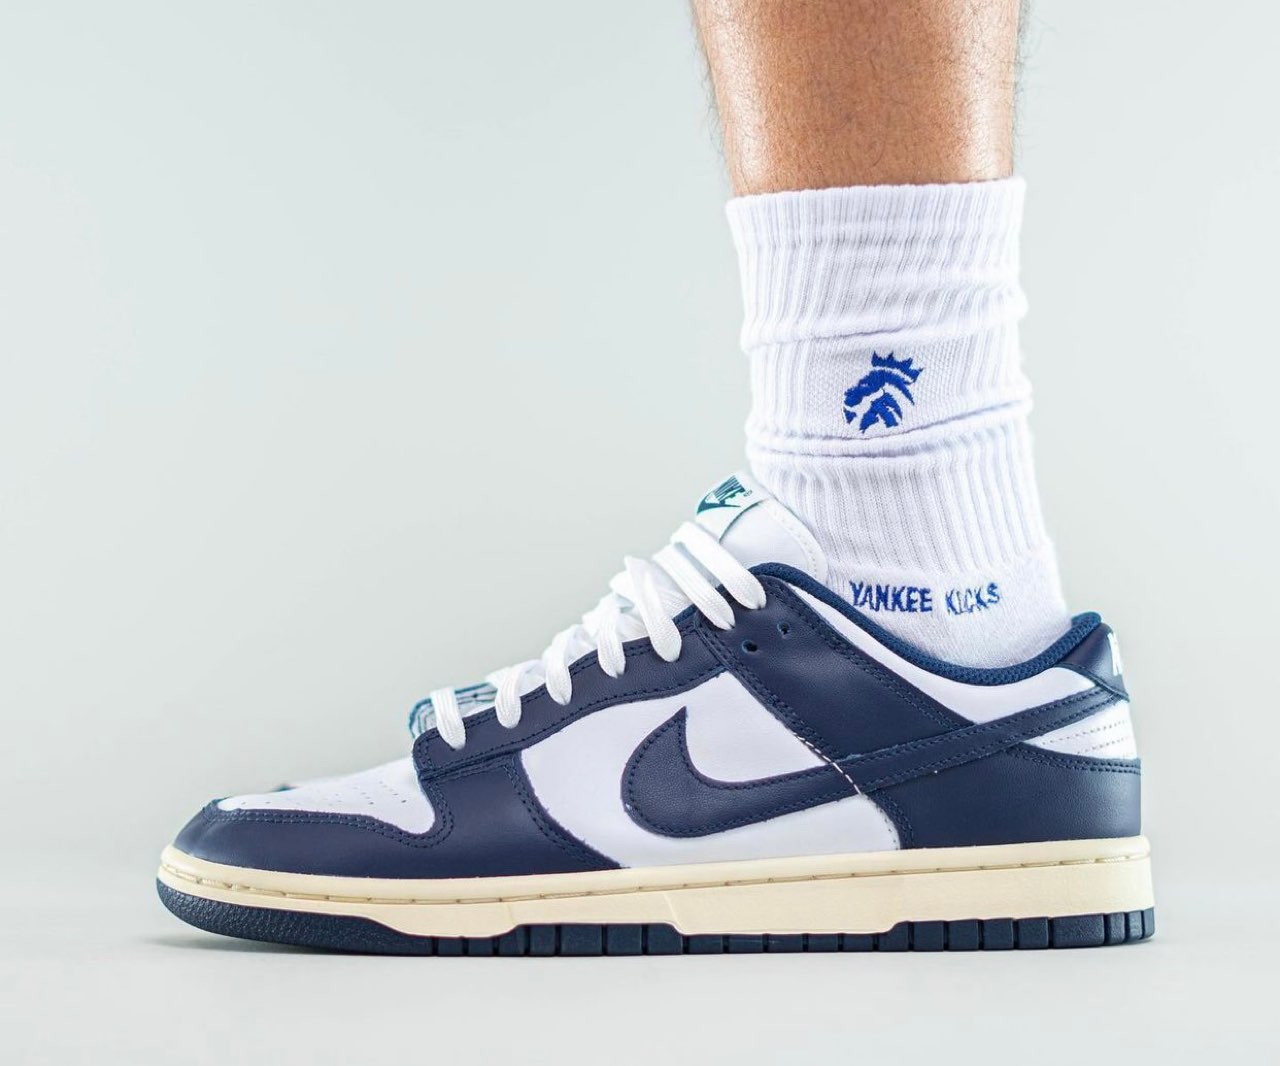 Nike Wmns Dunk Low “Aged Navy”が国内1月17日に発売予定 | UP TO DATE